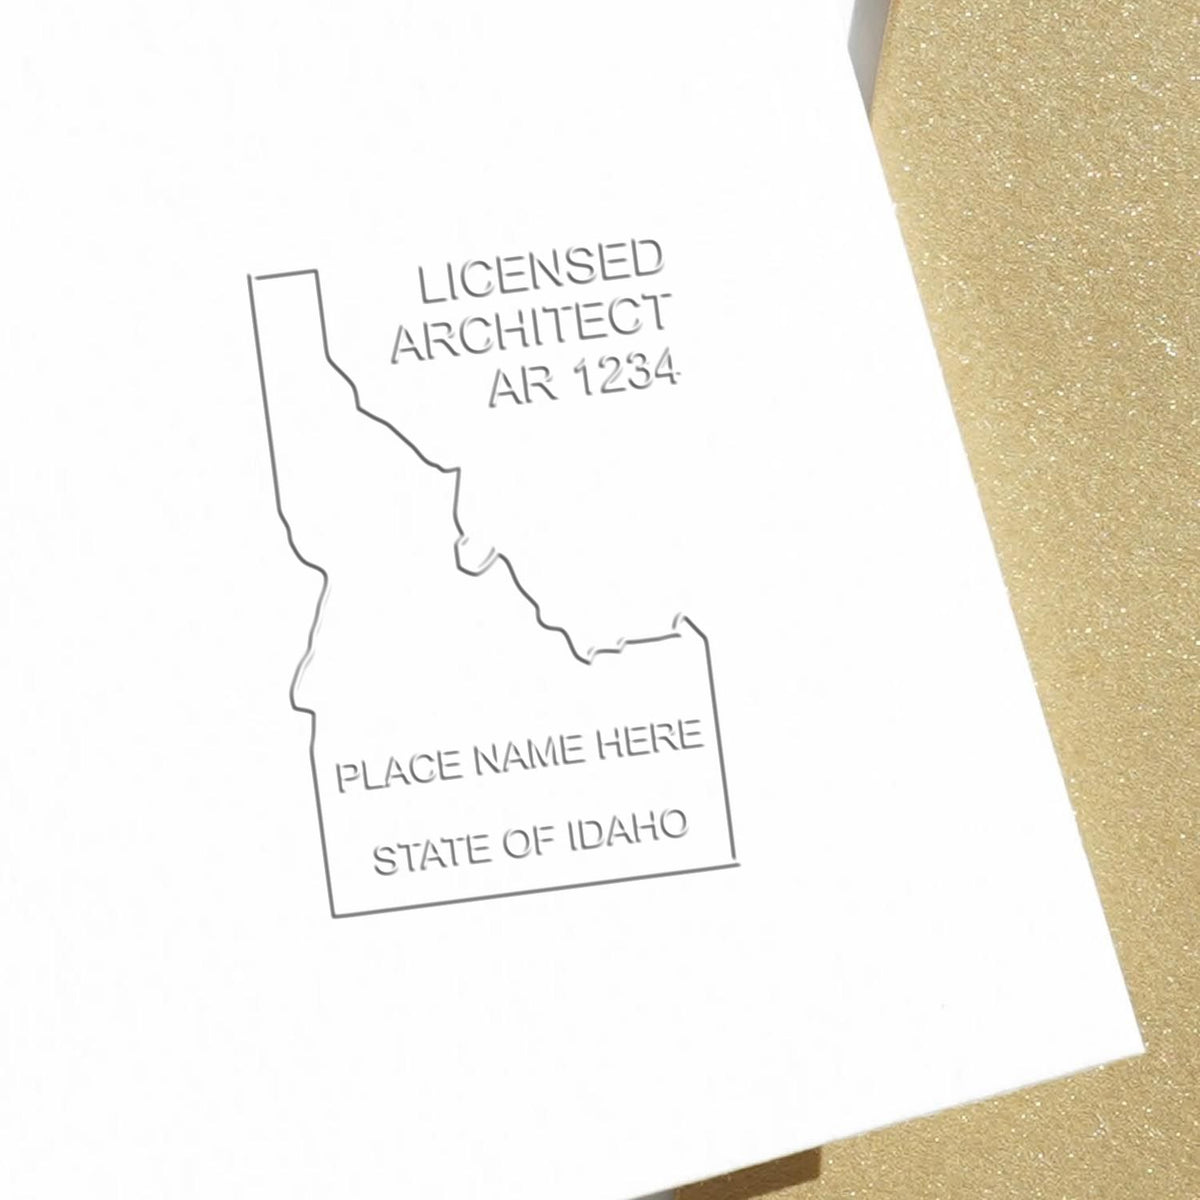 The State of Idaho Architectural Seal Embosser stamp impression comes to life with a crisp, detailed photo on paper - showcasing true professional quality.